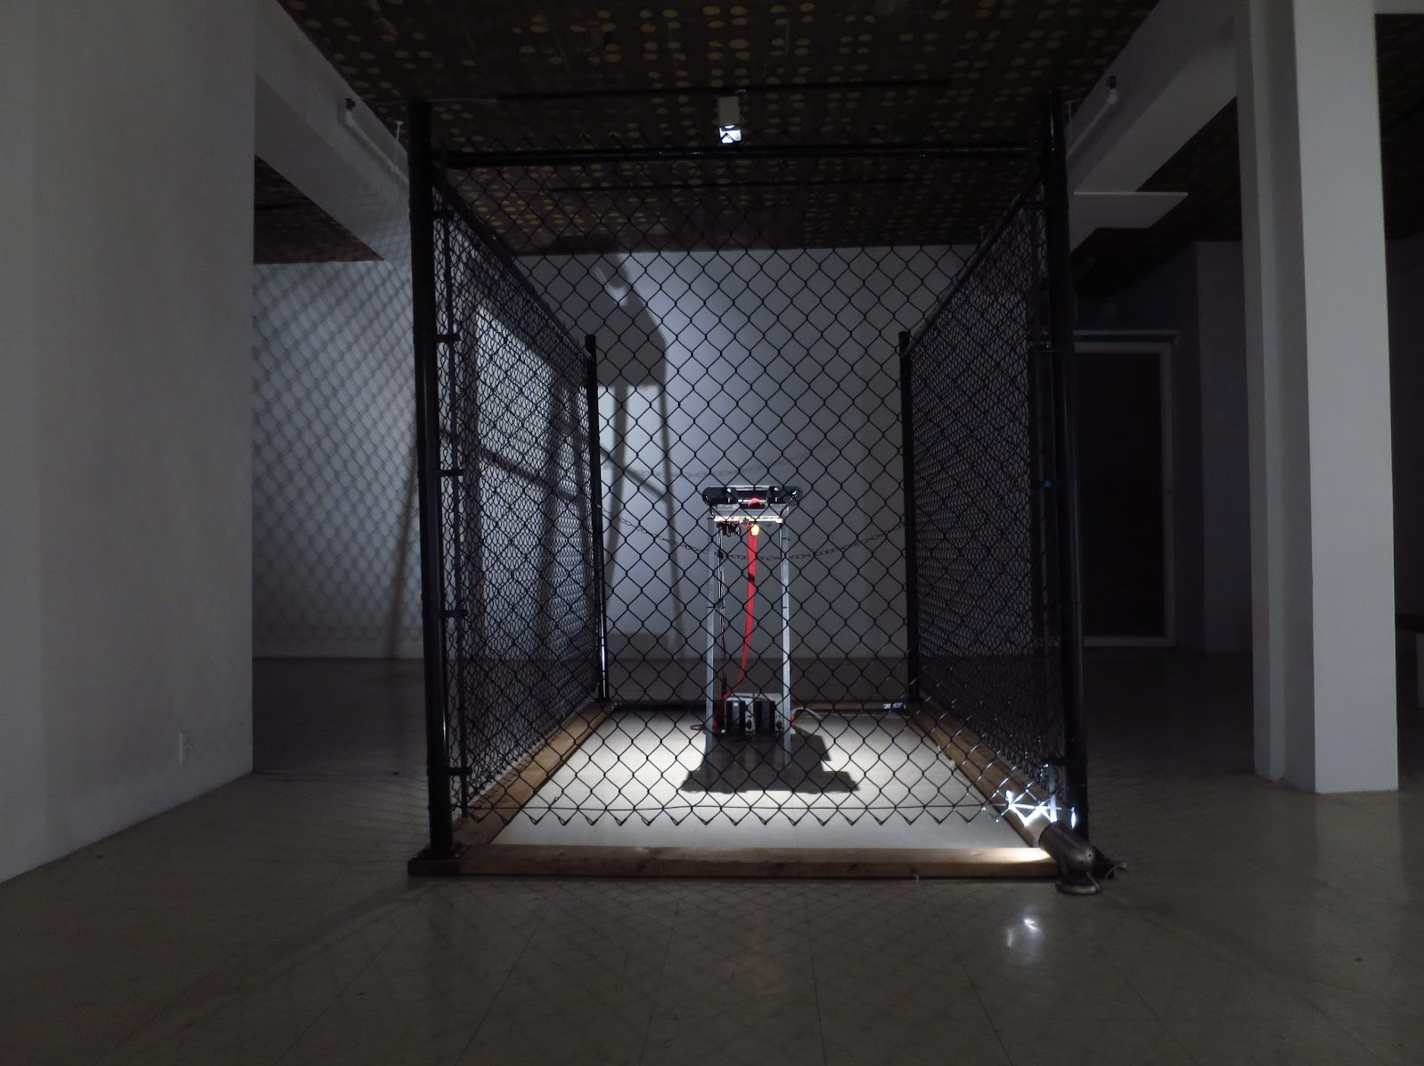 Installation shot of a projector inside a cage